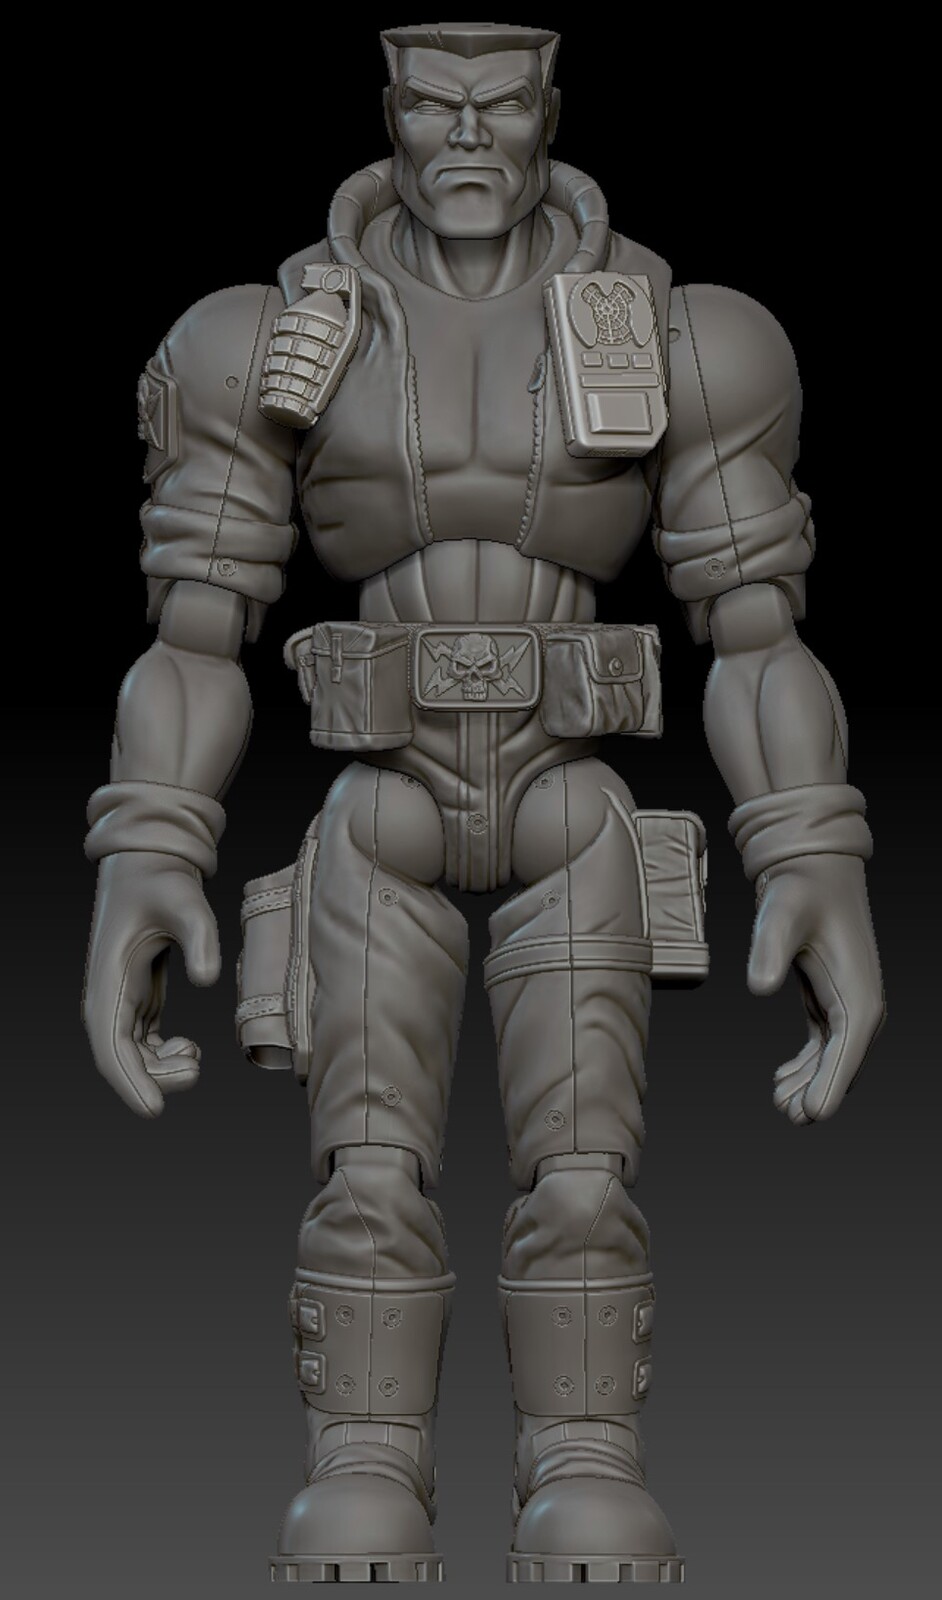 Cleanup up and ready for retopo. Note that I only included the seams and screws for the 3D print version of Chip. I chose not to include those extra details in the 3D asset.